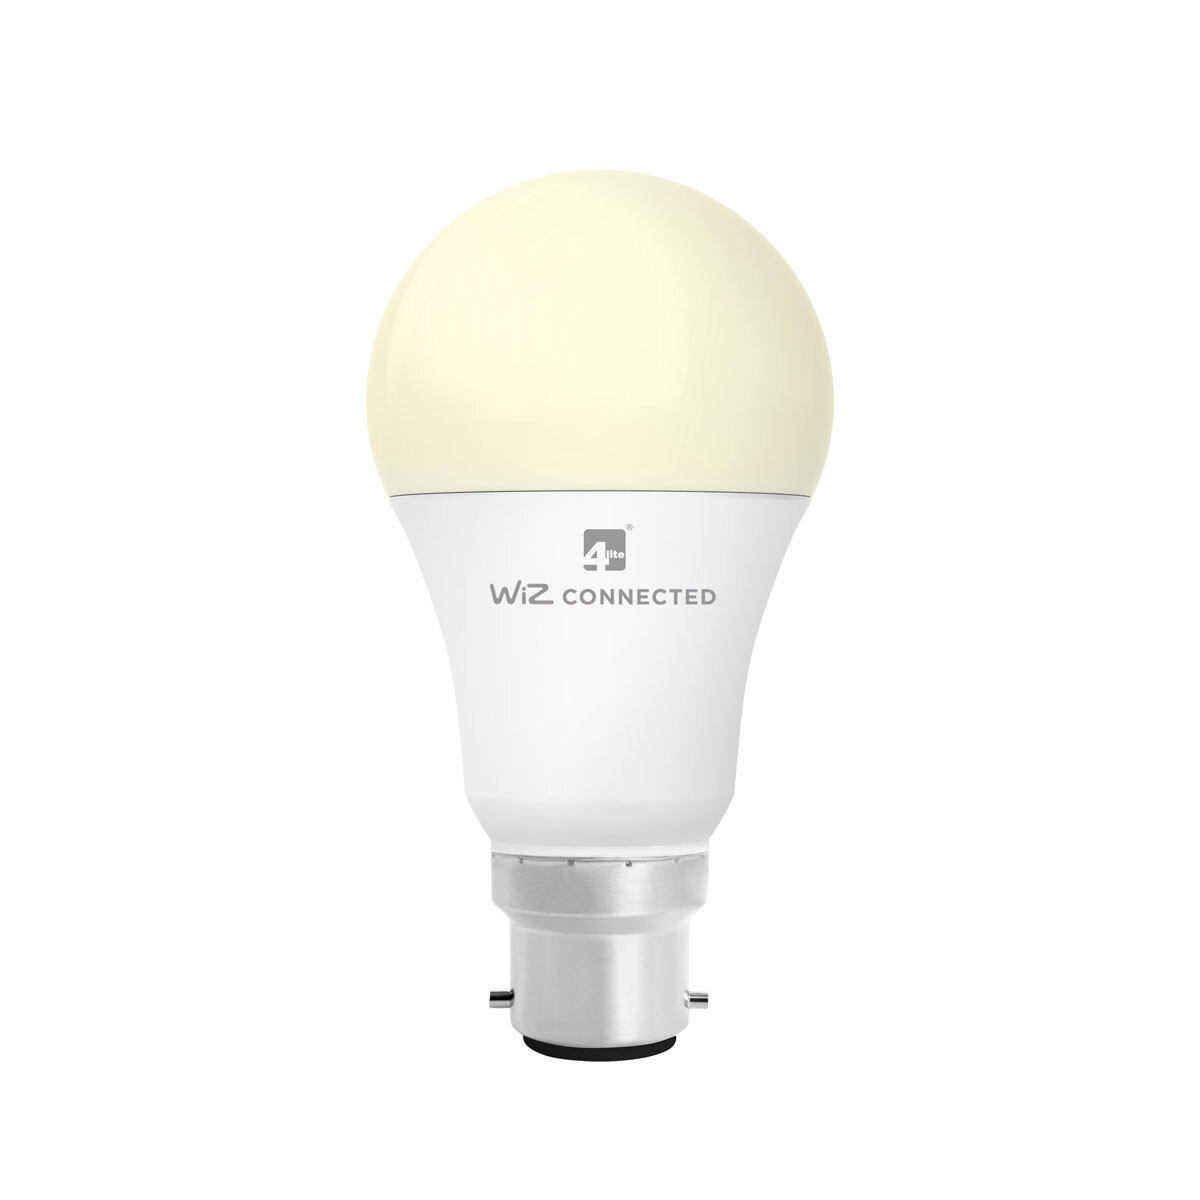 Cut out image of individual light bulb on white background